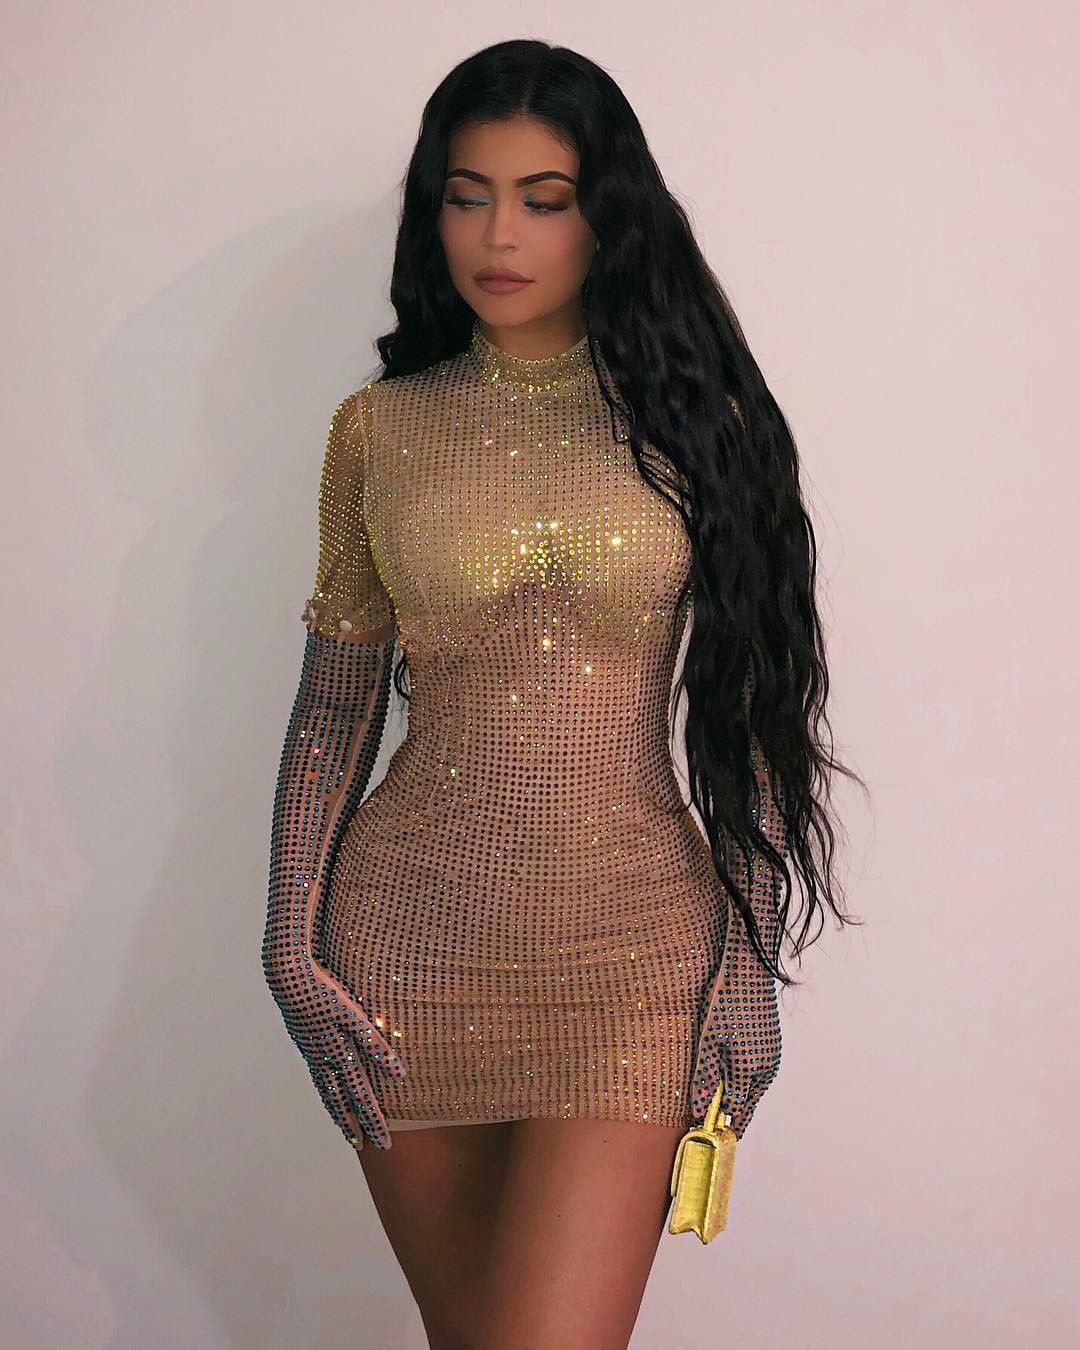 Cute Instagram Full Body Kylie Jenner Images: Kylie Jenner,  FASHION,  Instagram photos,  Stylevore,  Vintage clothing,  luxury,  Vogue,  kylie jenner Photos,  kylie jenner Style,  Cute kylie jenner,  kylie jenner Instagram,  kyliejenner,  haileybaldwin,  arianagrande  